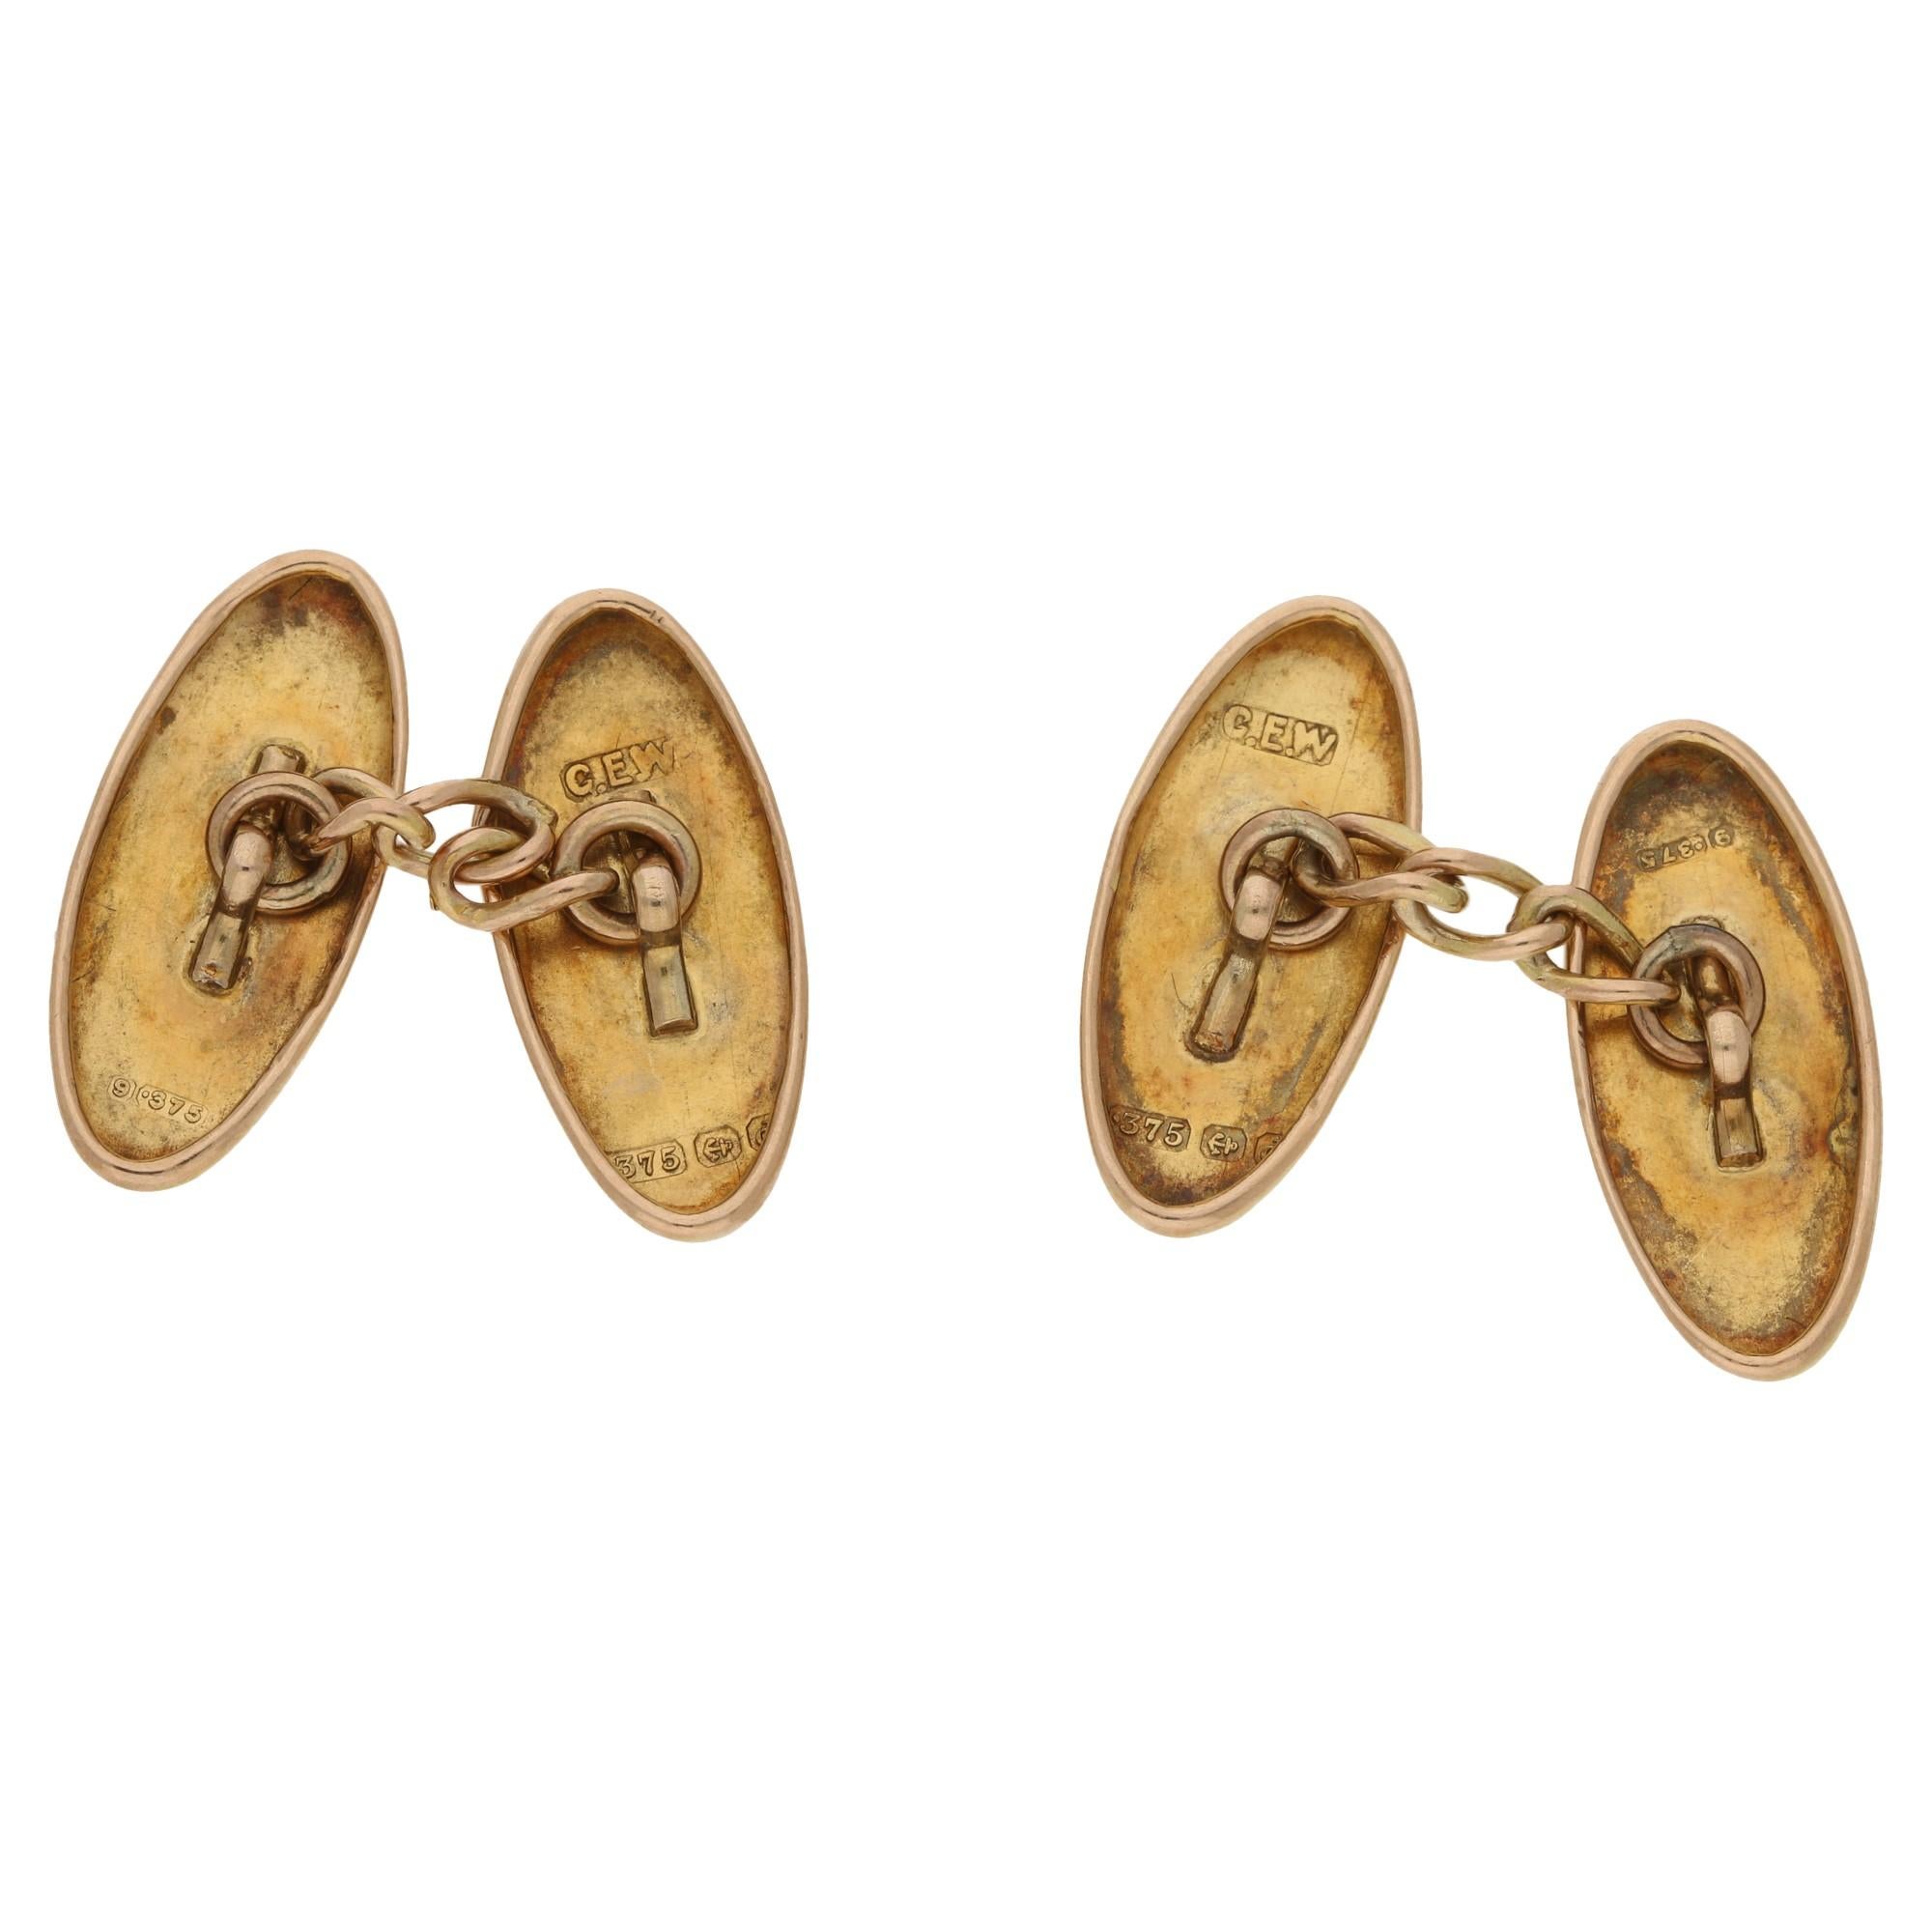 A pair of antique rose gold cufflinks, detailed with a leaf pattern. 
Makers mark 'C.E.W.', hallmarked Birmingham, 375, dated 1903.  
On a five link chain fitting.